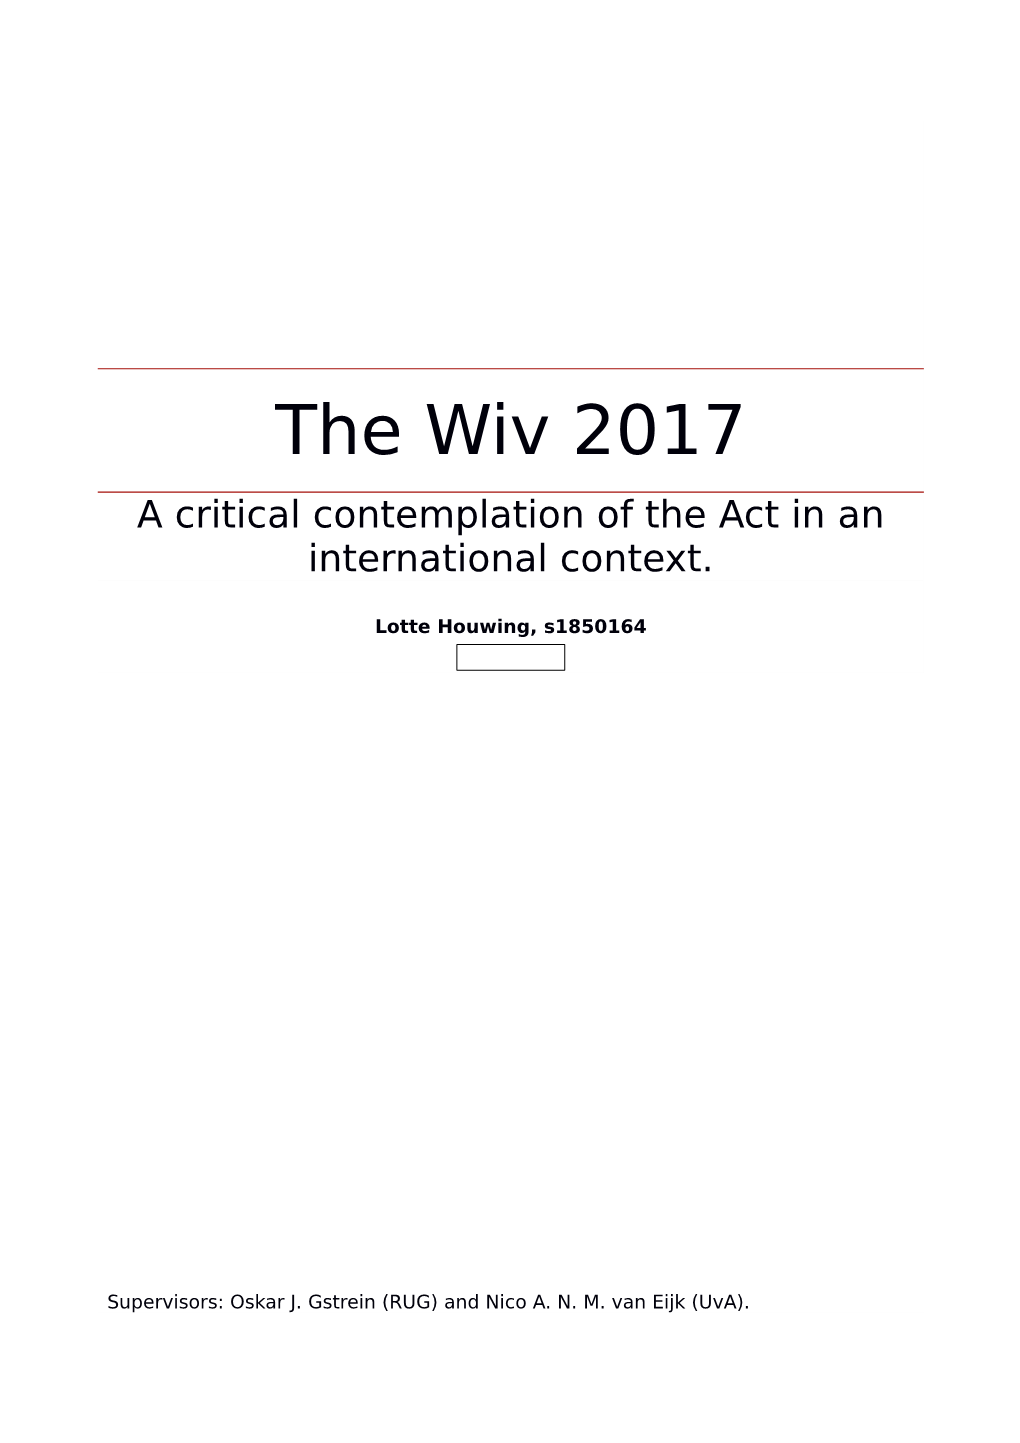 The Wiv 2017 a Critical Contemplation of the Act in an International Context